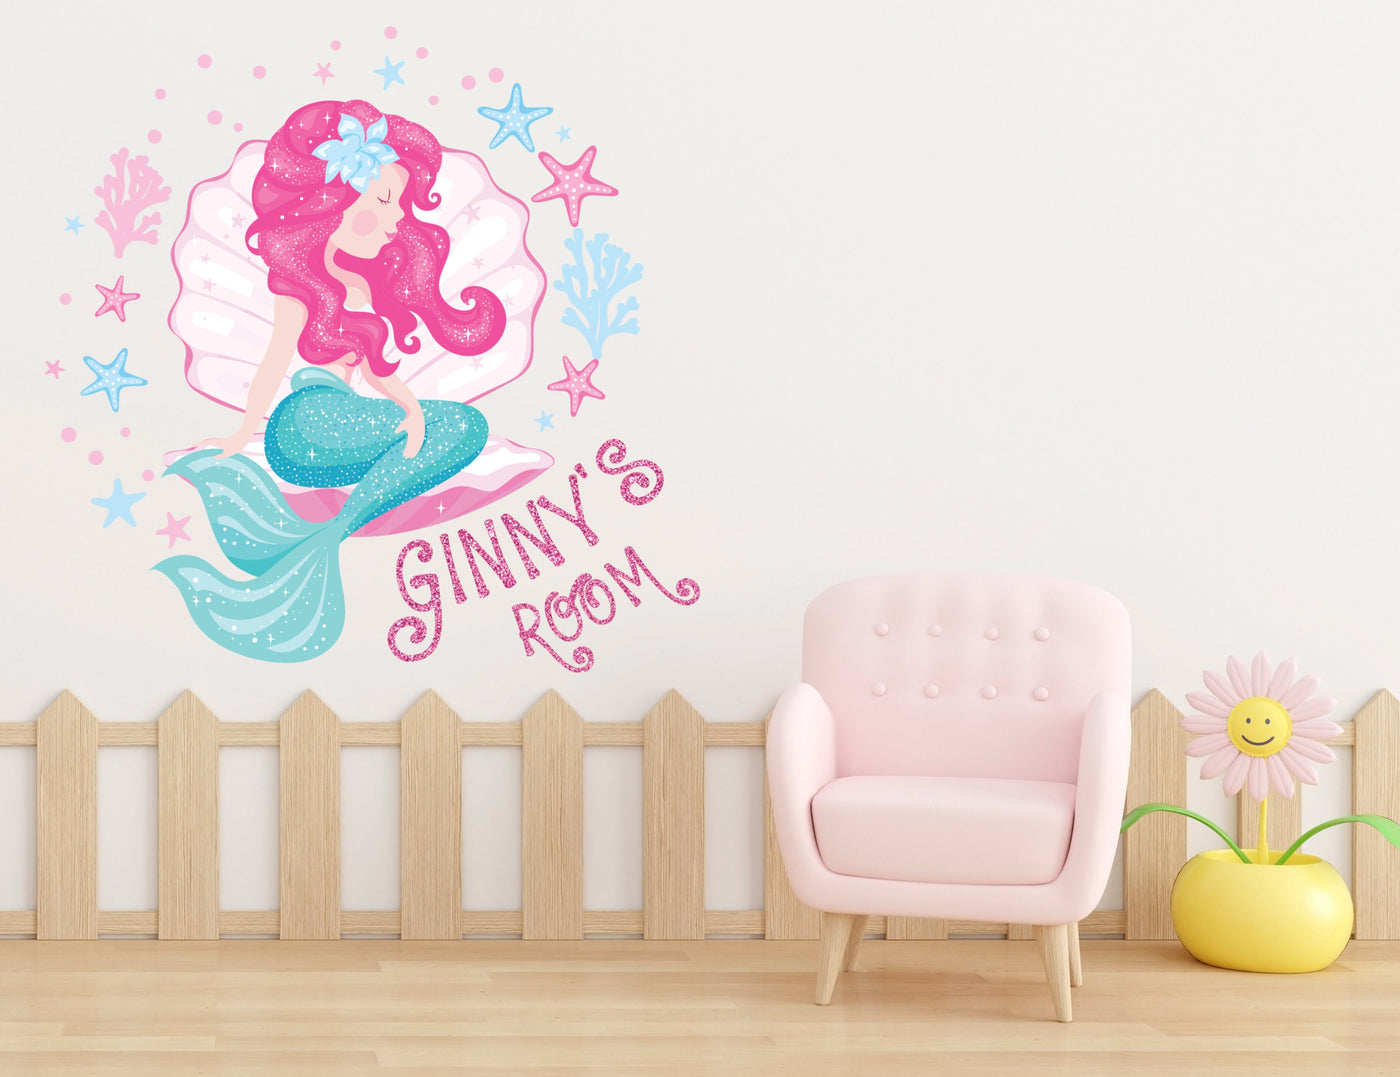 Little Mermaid Wall Decal Decor for Girls Bedroom - Large Mermaid Tail Stickers for Room Decor - Custom Name Pink Decal for Girls Room Baby